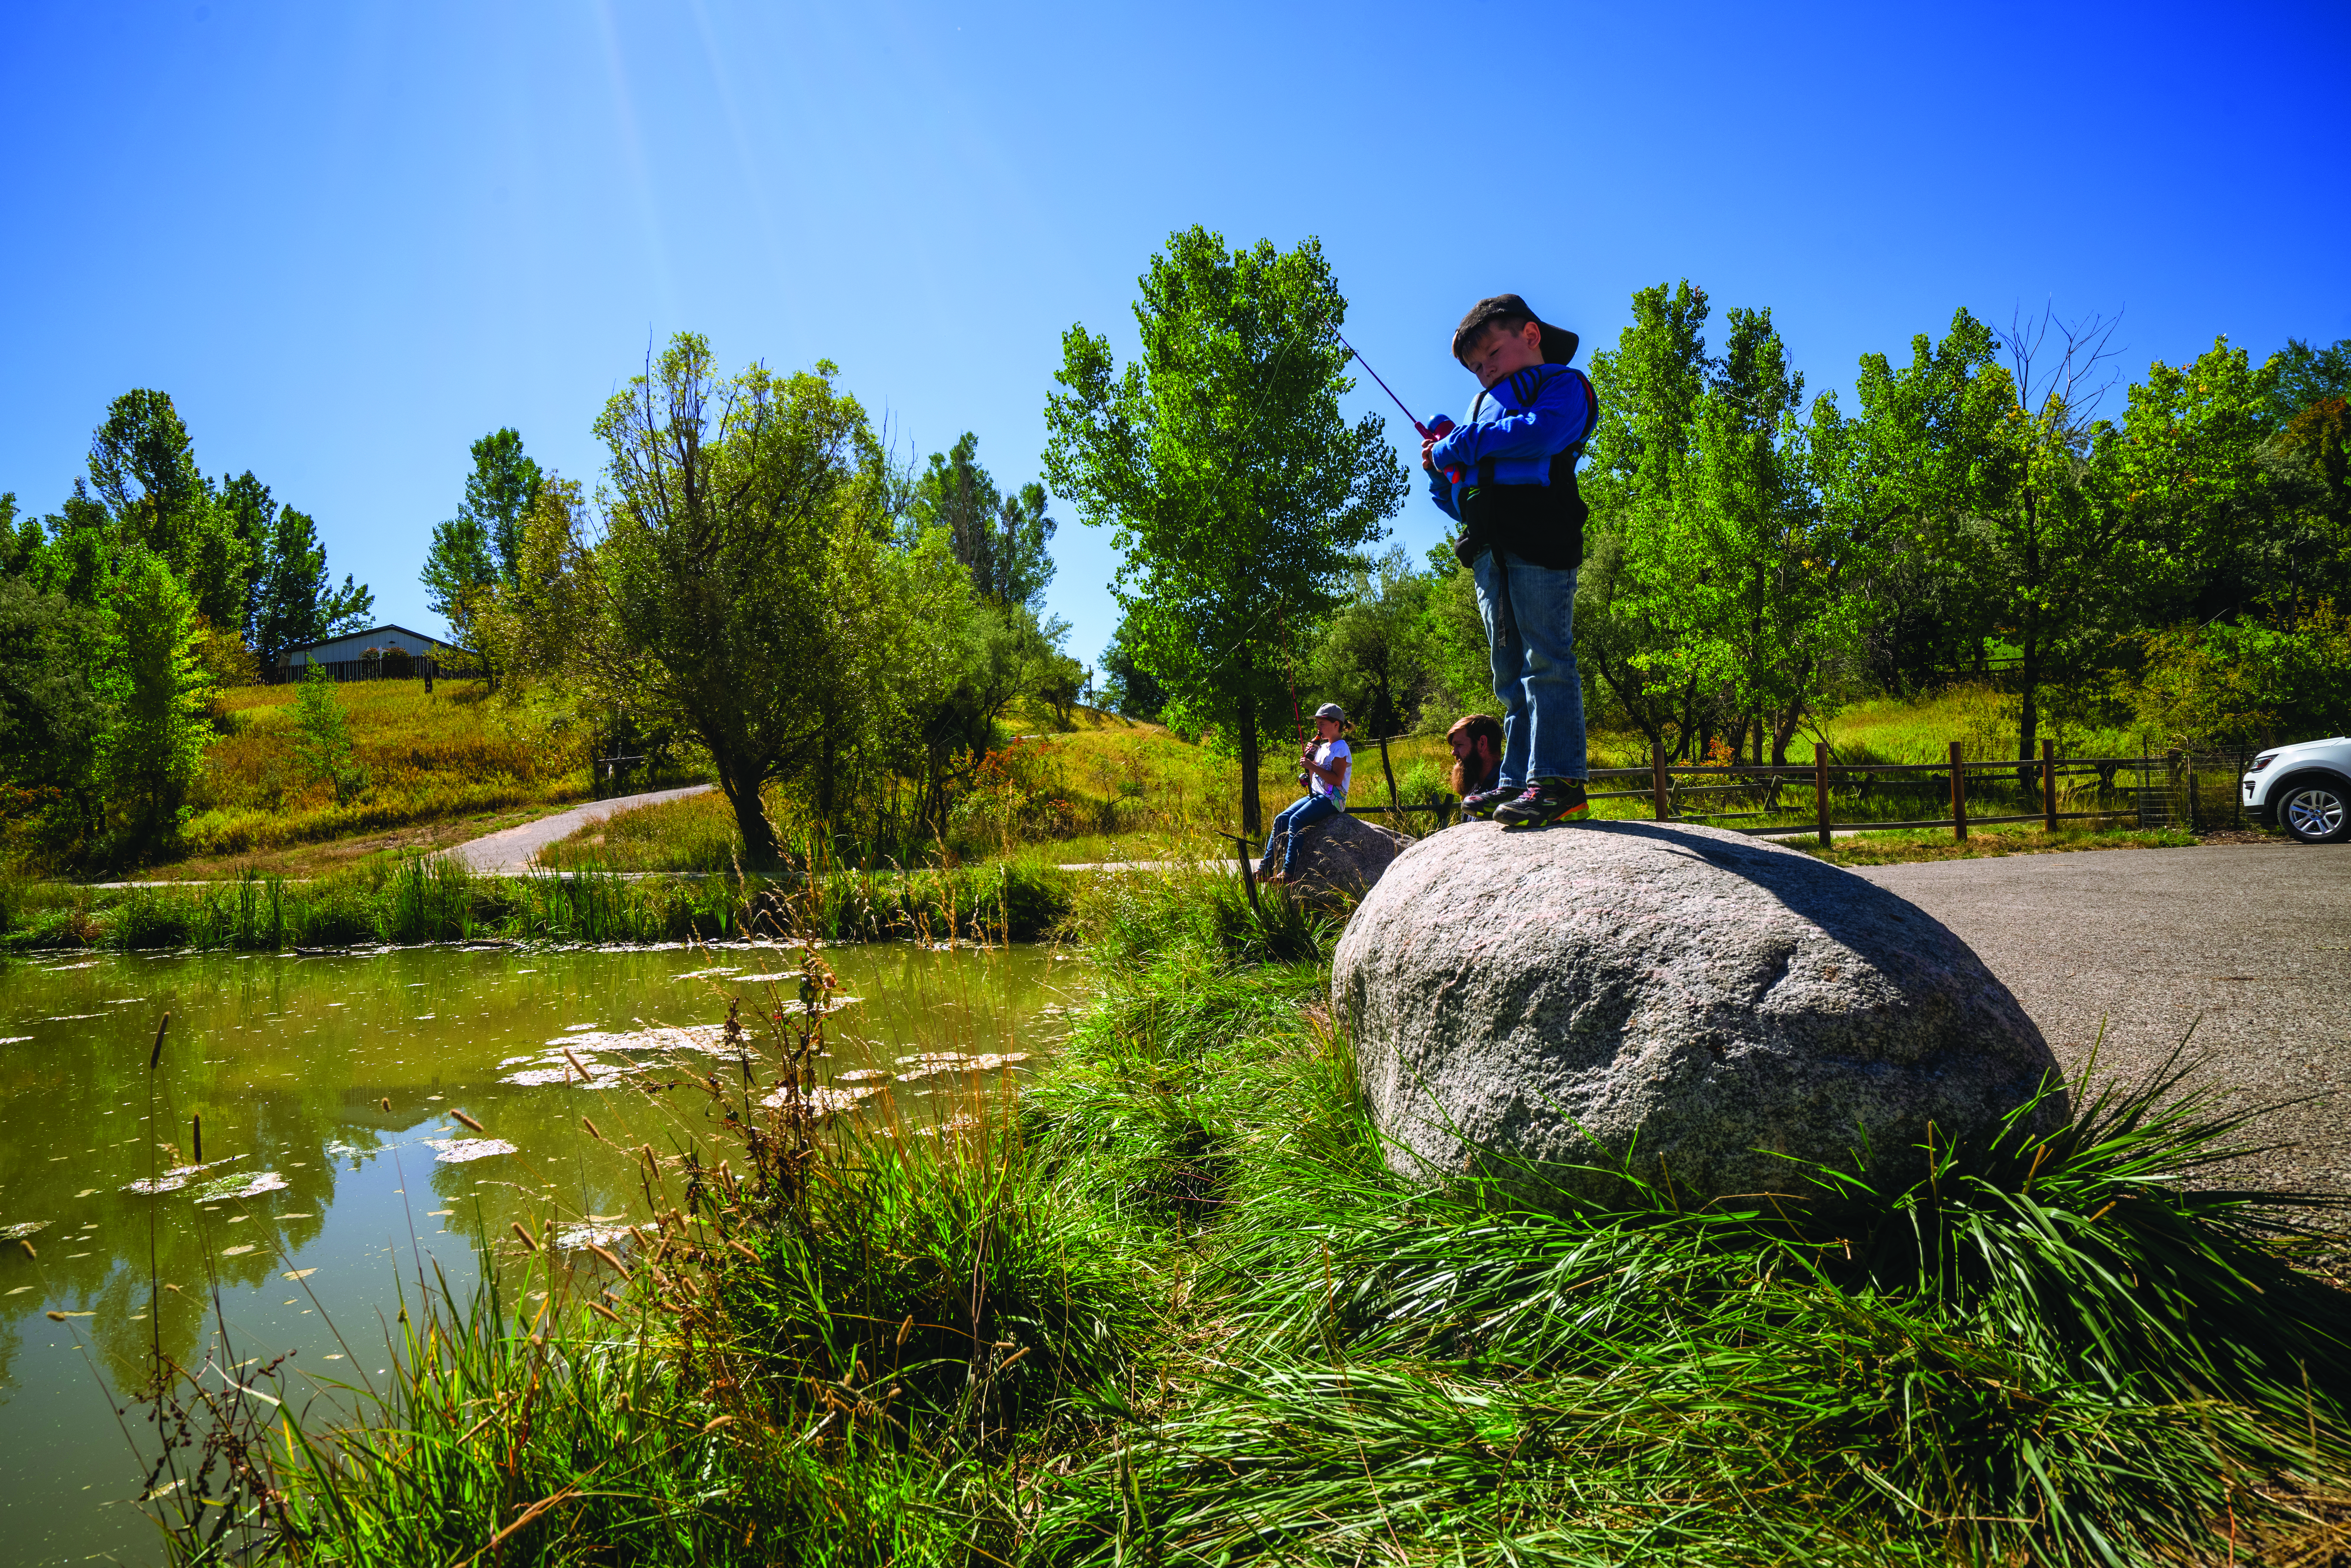 A boy fishes from on top of a rock on the shoreline of Mavrakis  pond in Sheridan, Wyoming.